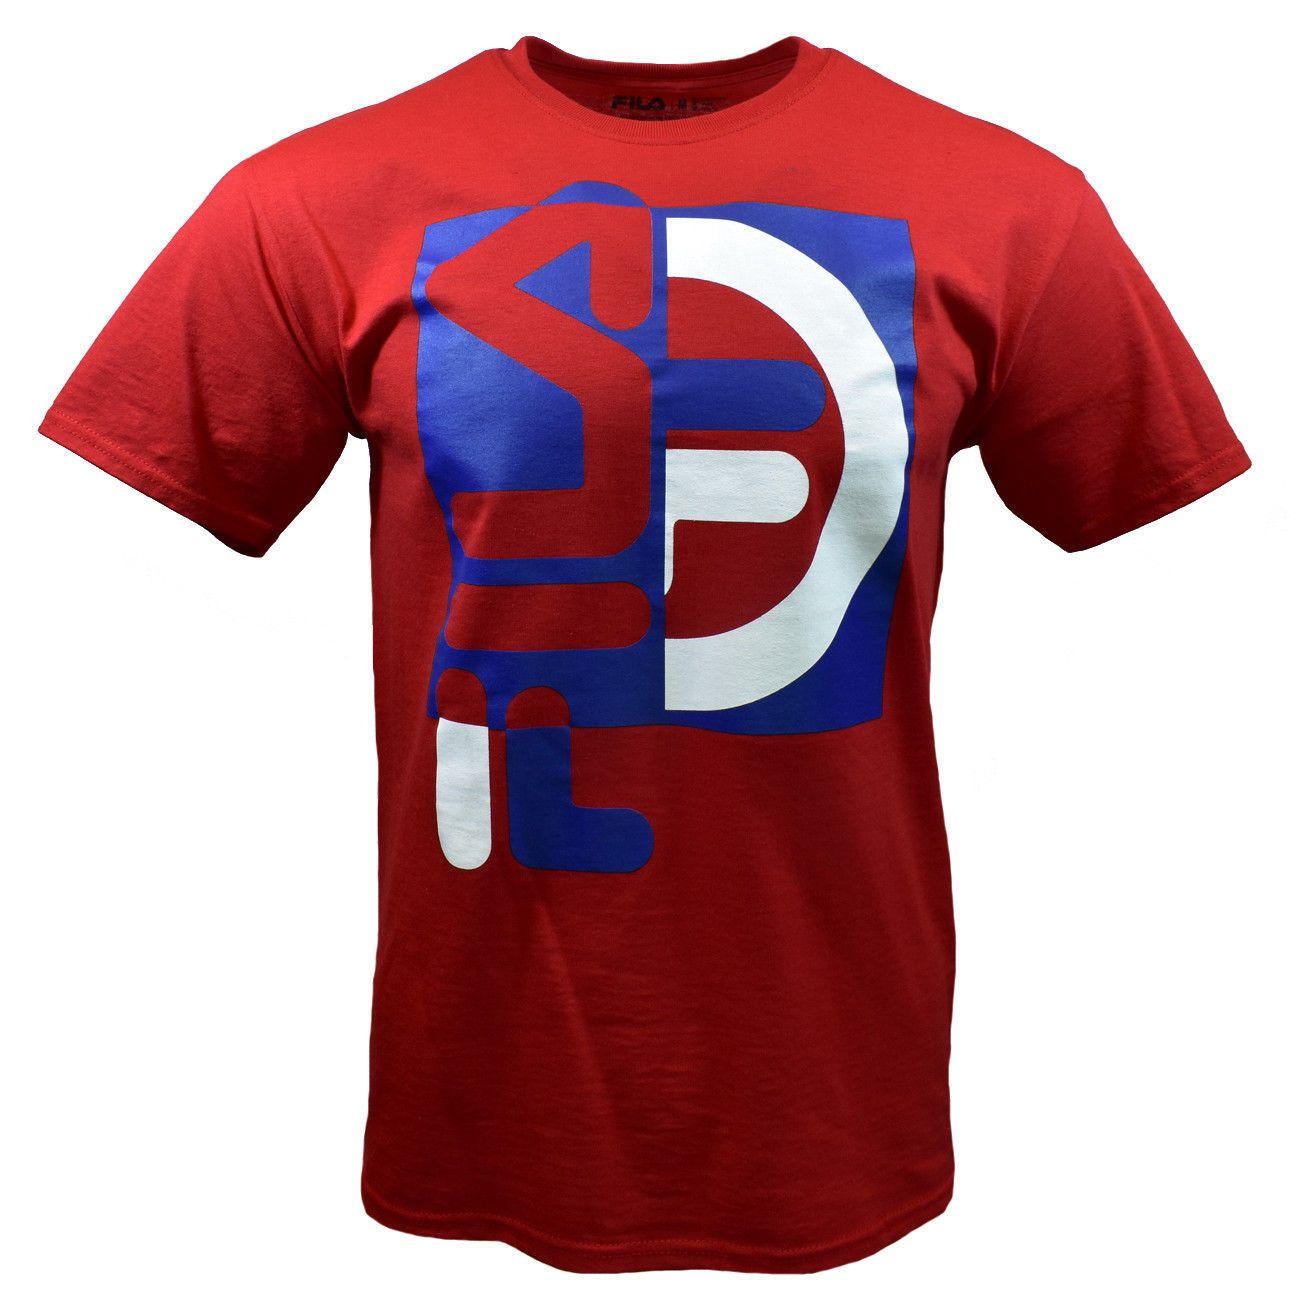 Red White and Blue Clothing and Apparel Logo - 2019 的 FILA Mens Tee T Shirt S M L Red White Blue Sports Logo ...